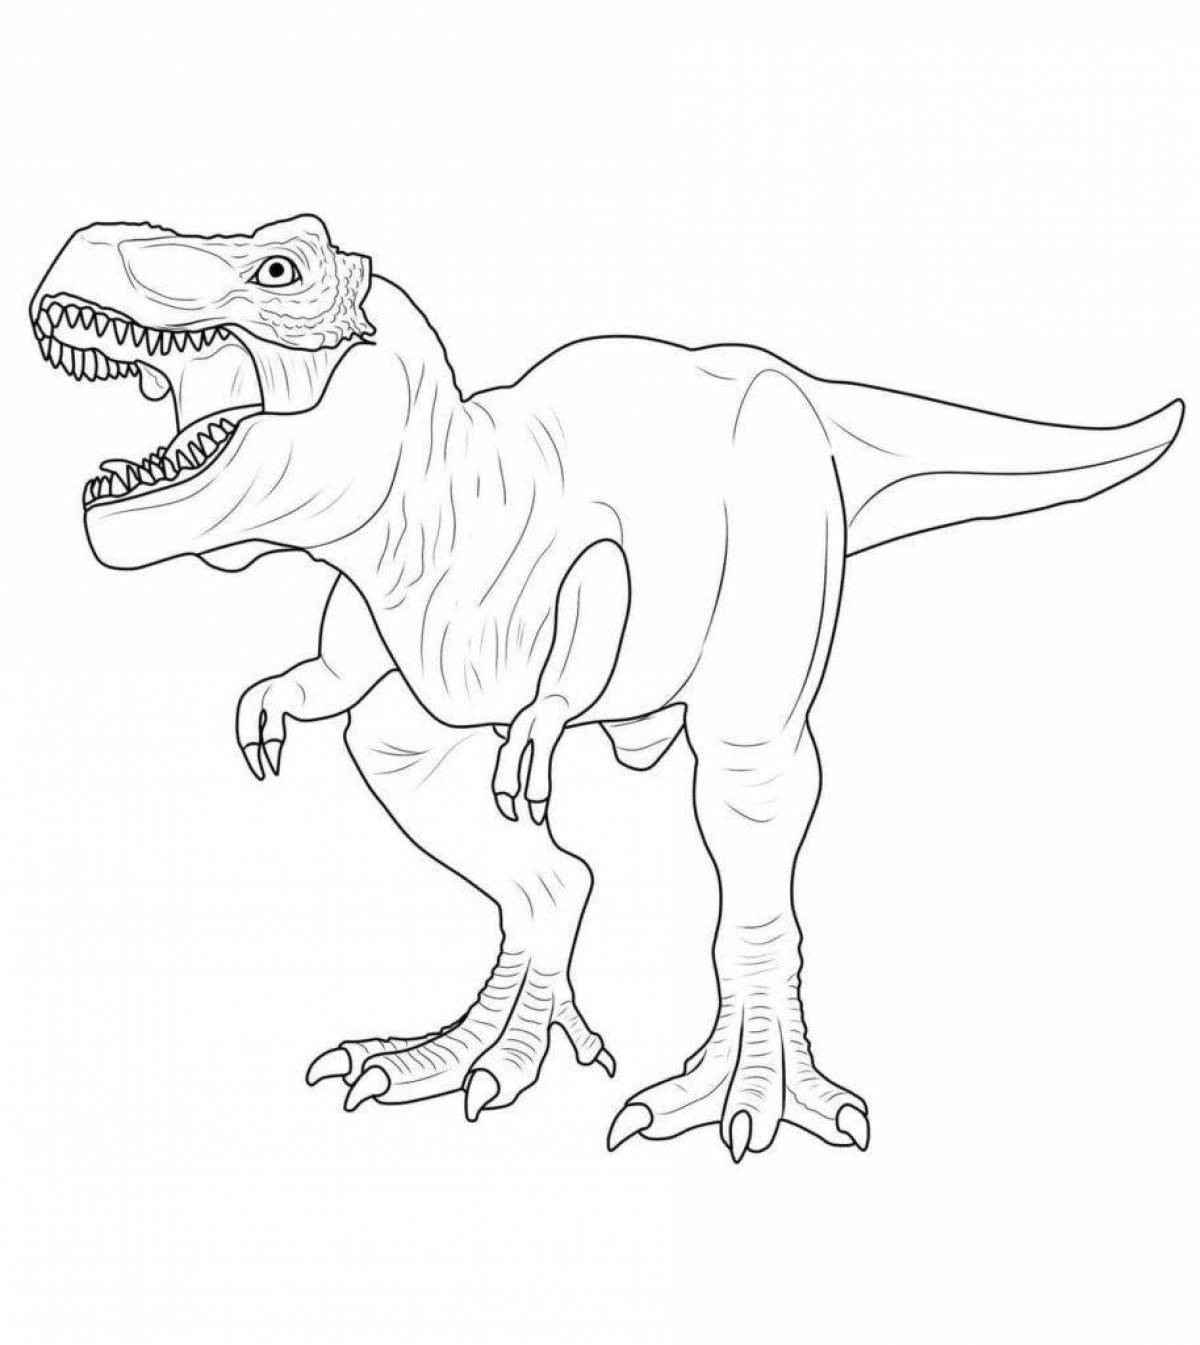 Tirex dinosaur colorful coloring page